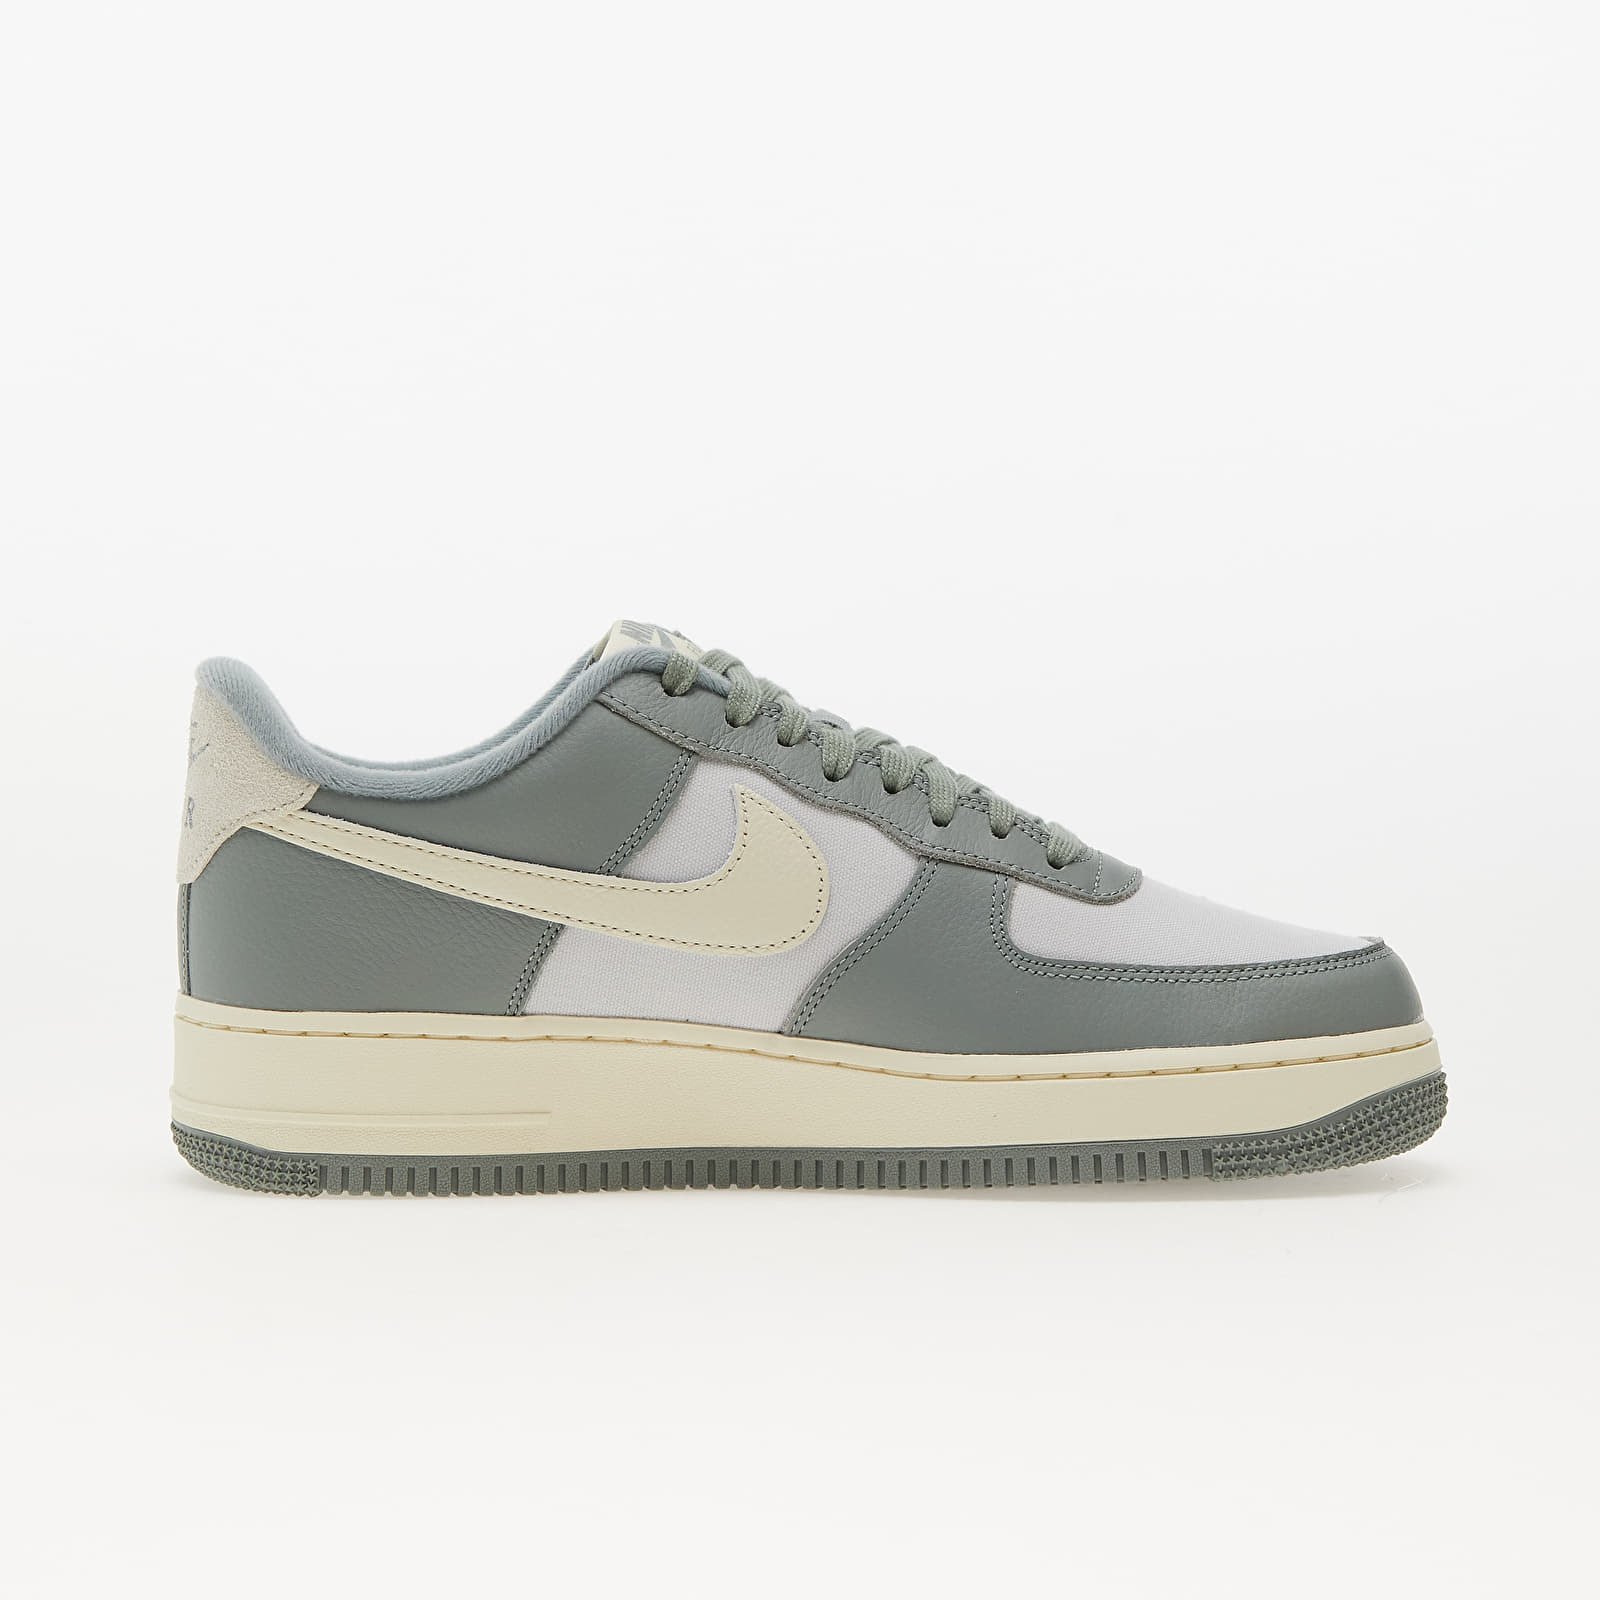 Air Force 1 Low '07 LX "Mica Green"